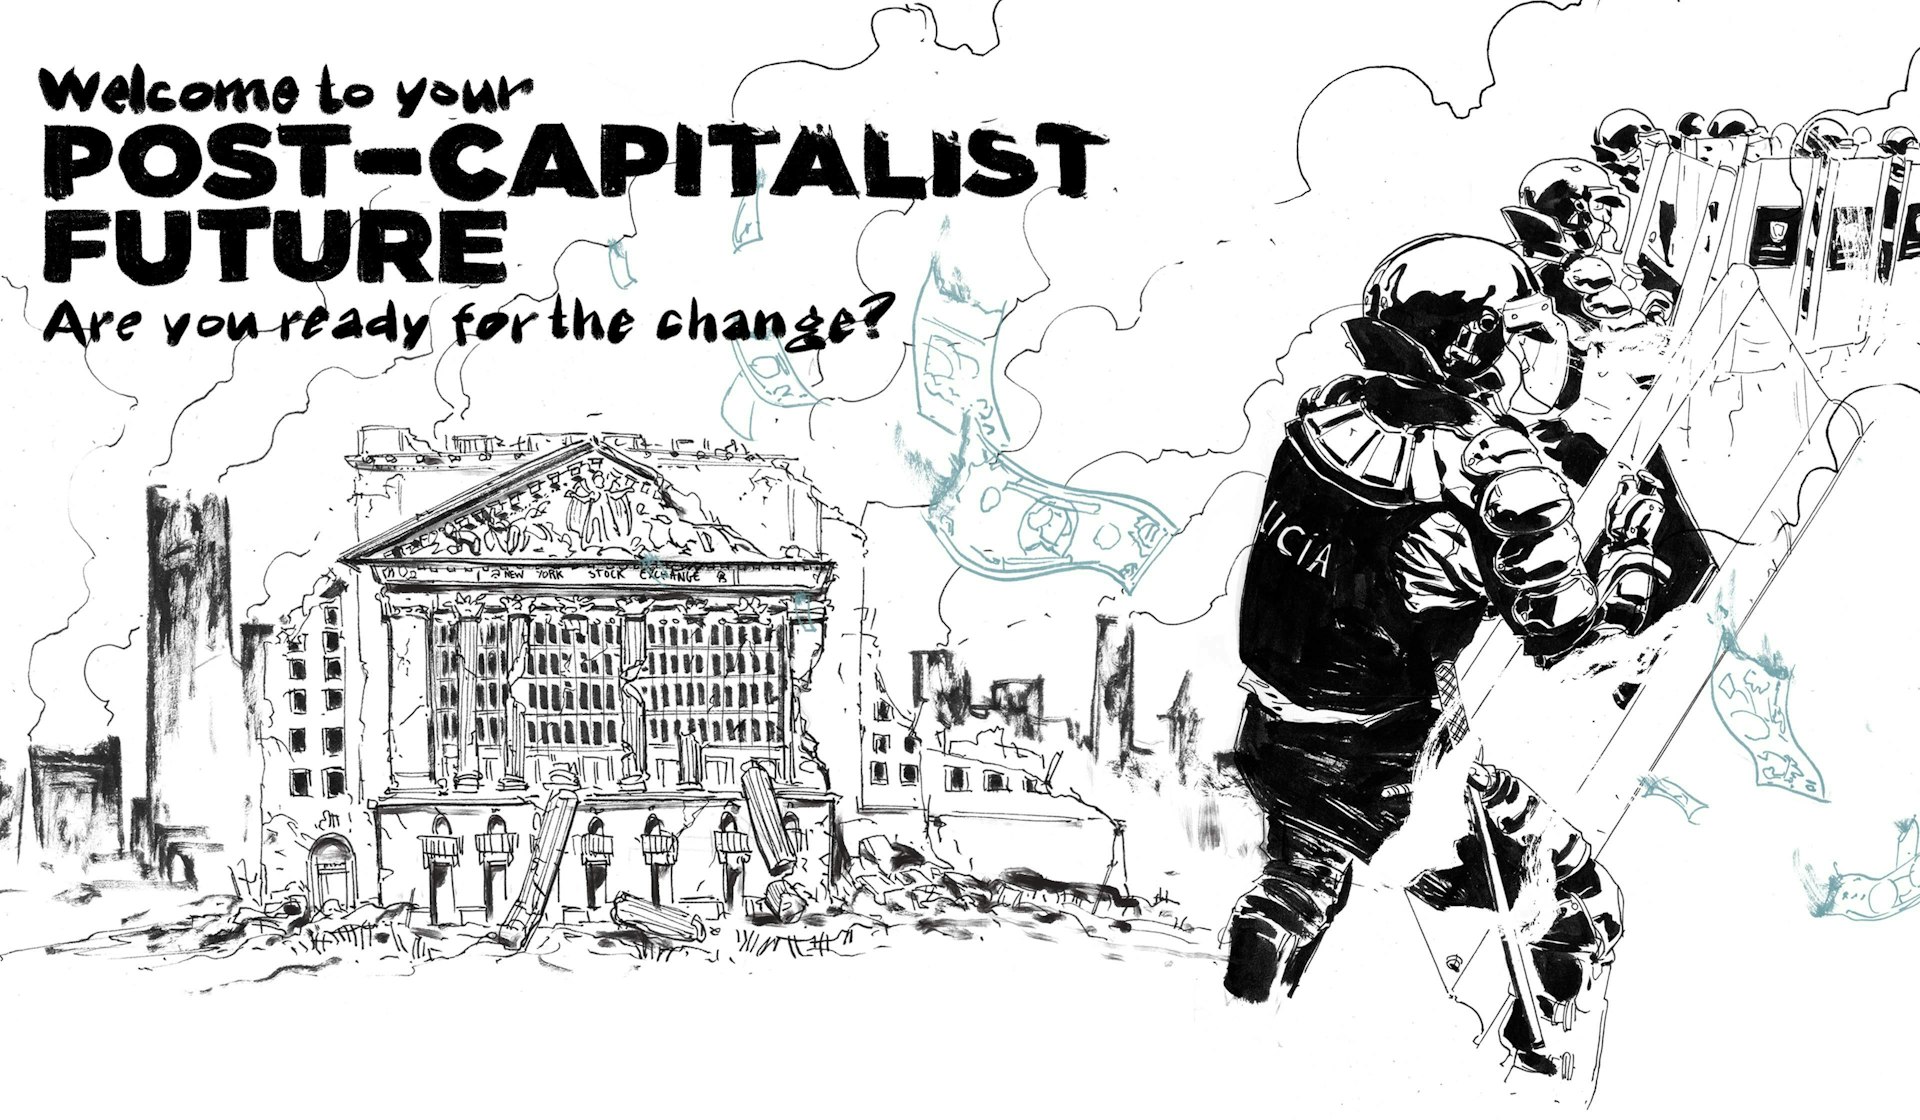 Welcome to your Post-Capitalist future